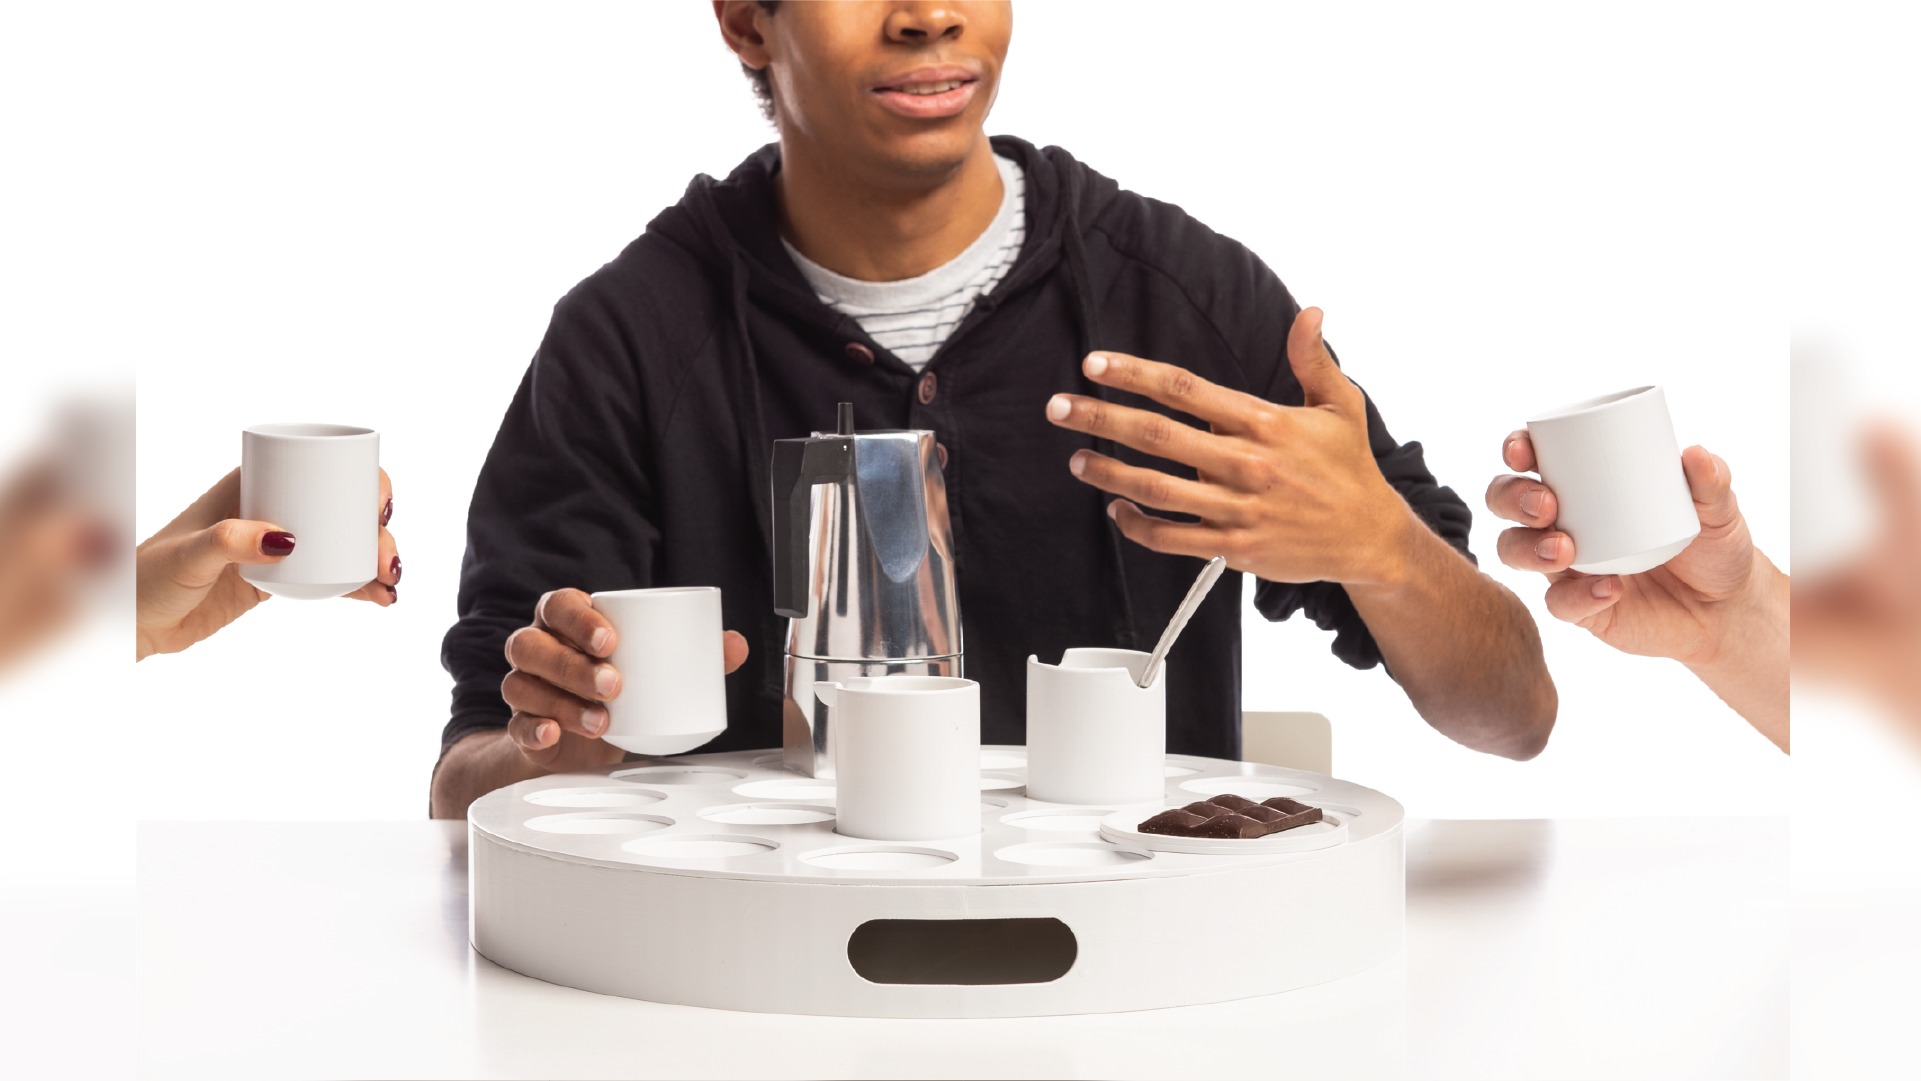 Person interacting on the back ground with hands on the both sides holding cups. The set is in the middle holding some items such as cups, a kettle and food on a tray.